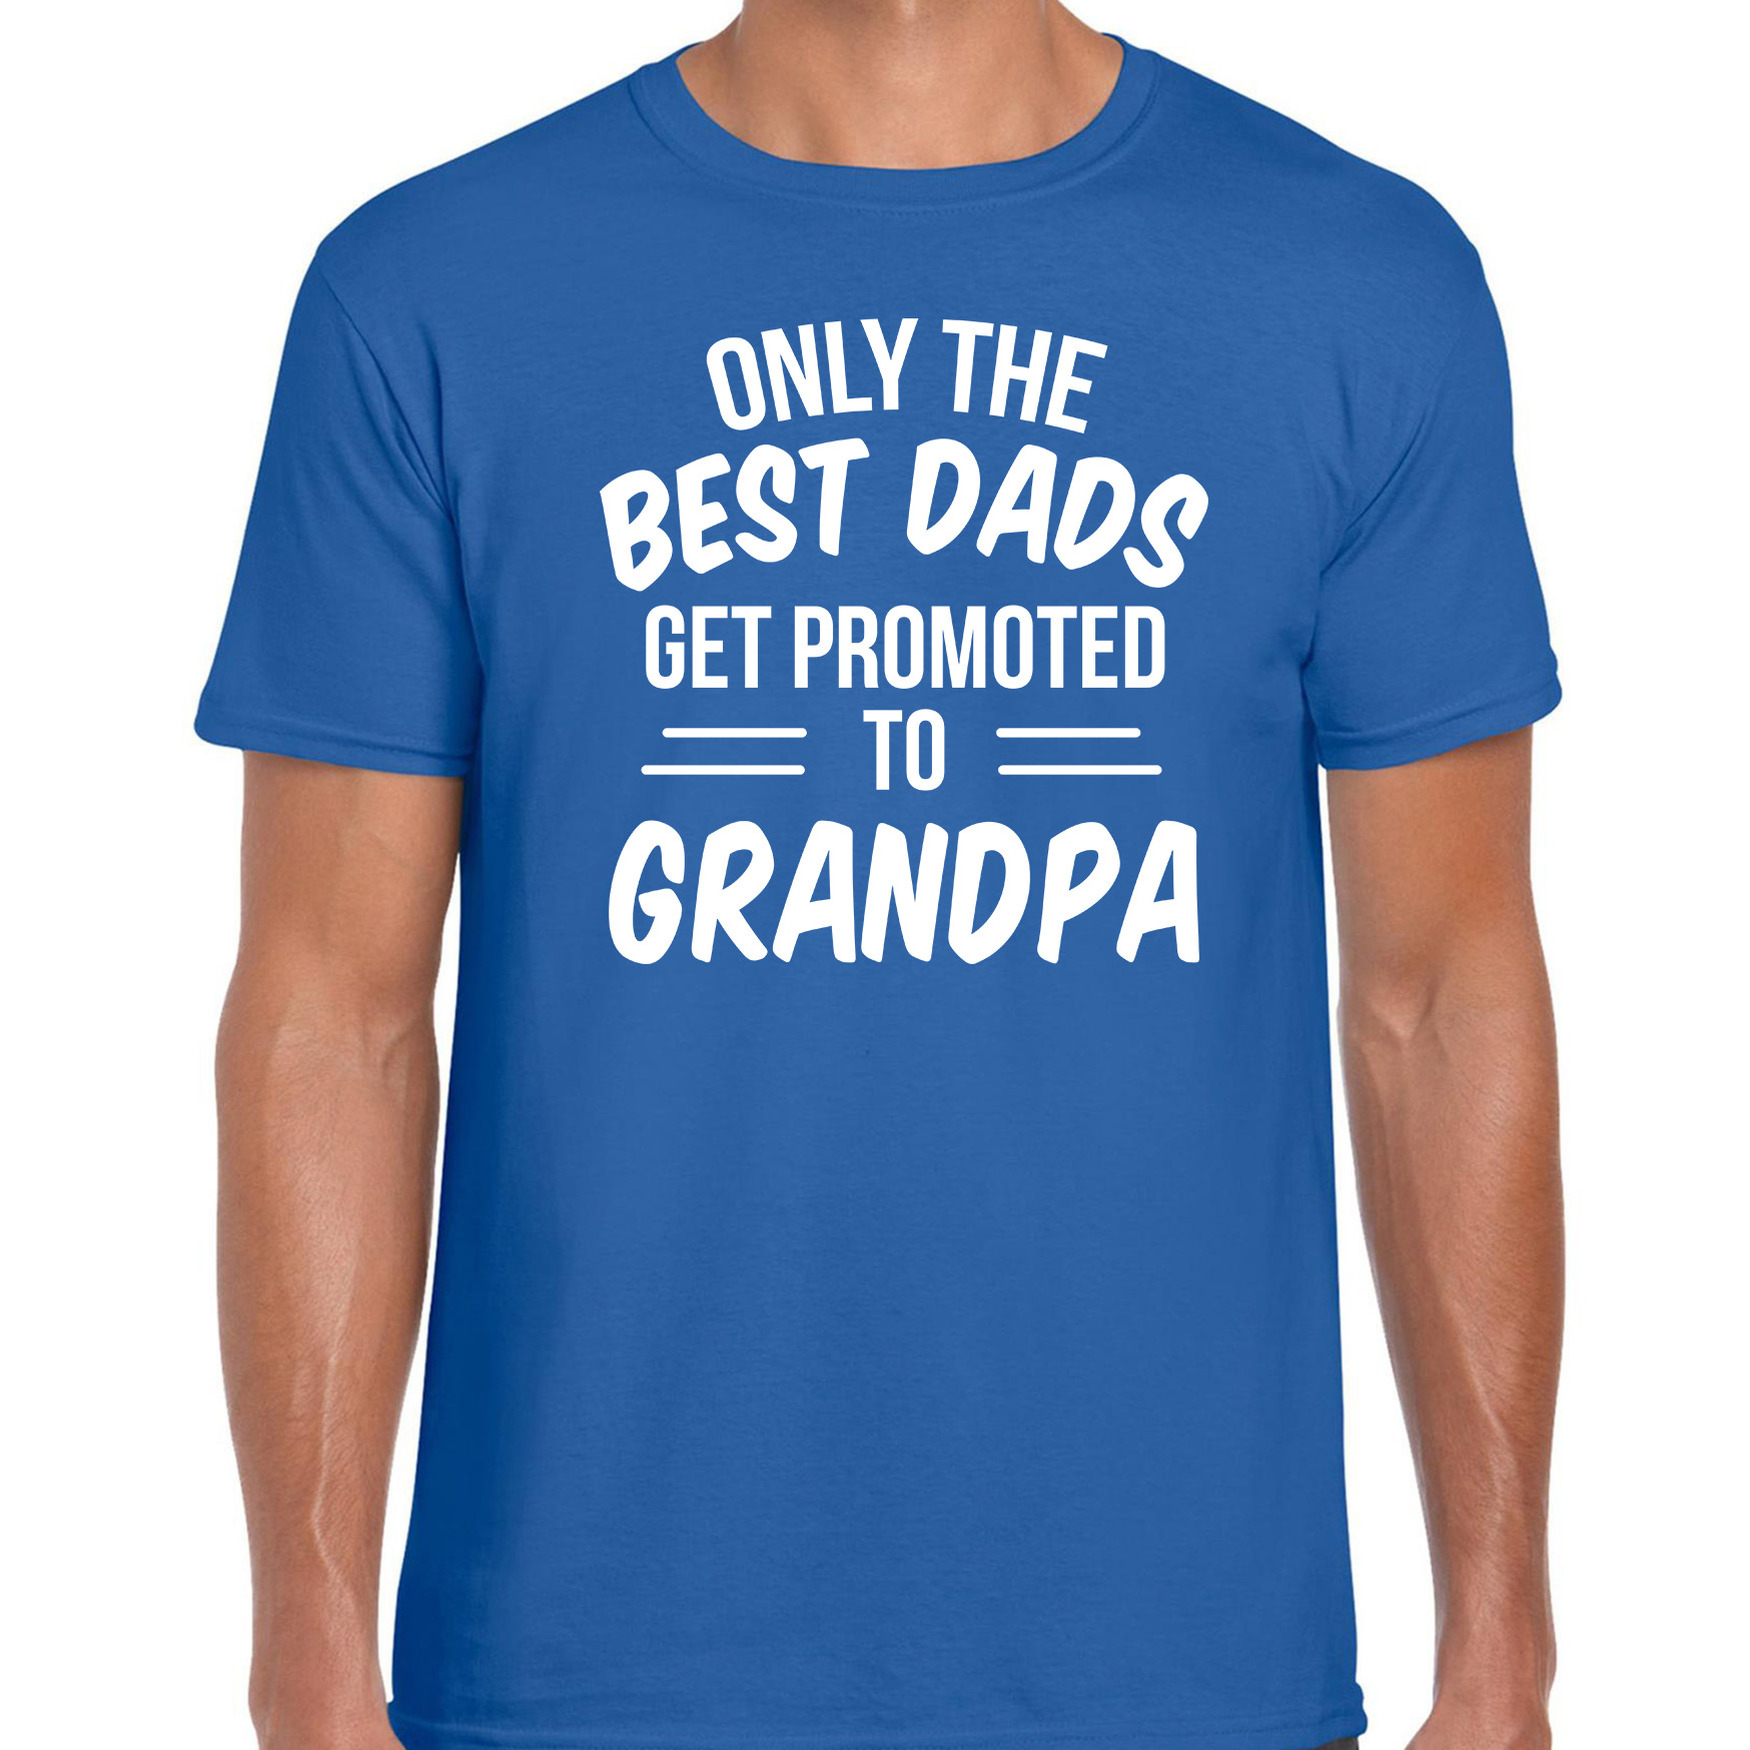 Only the best dads get promoted to grandpa t-shirt blauw voor heren